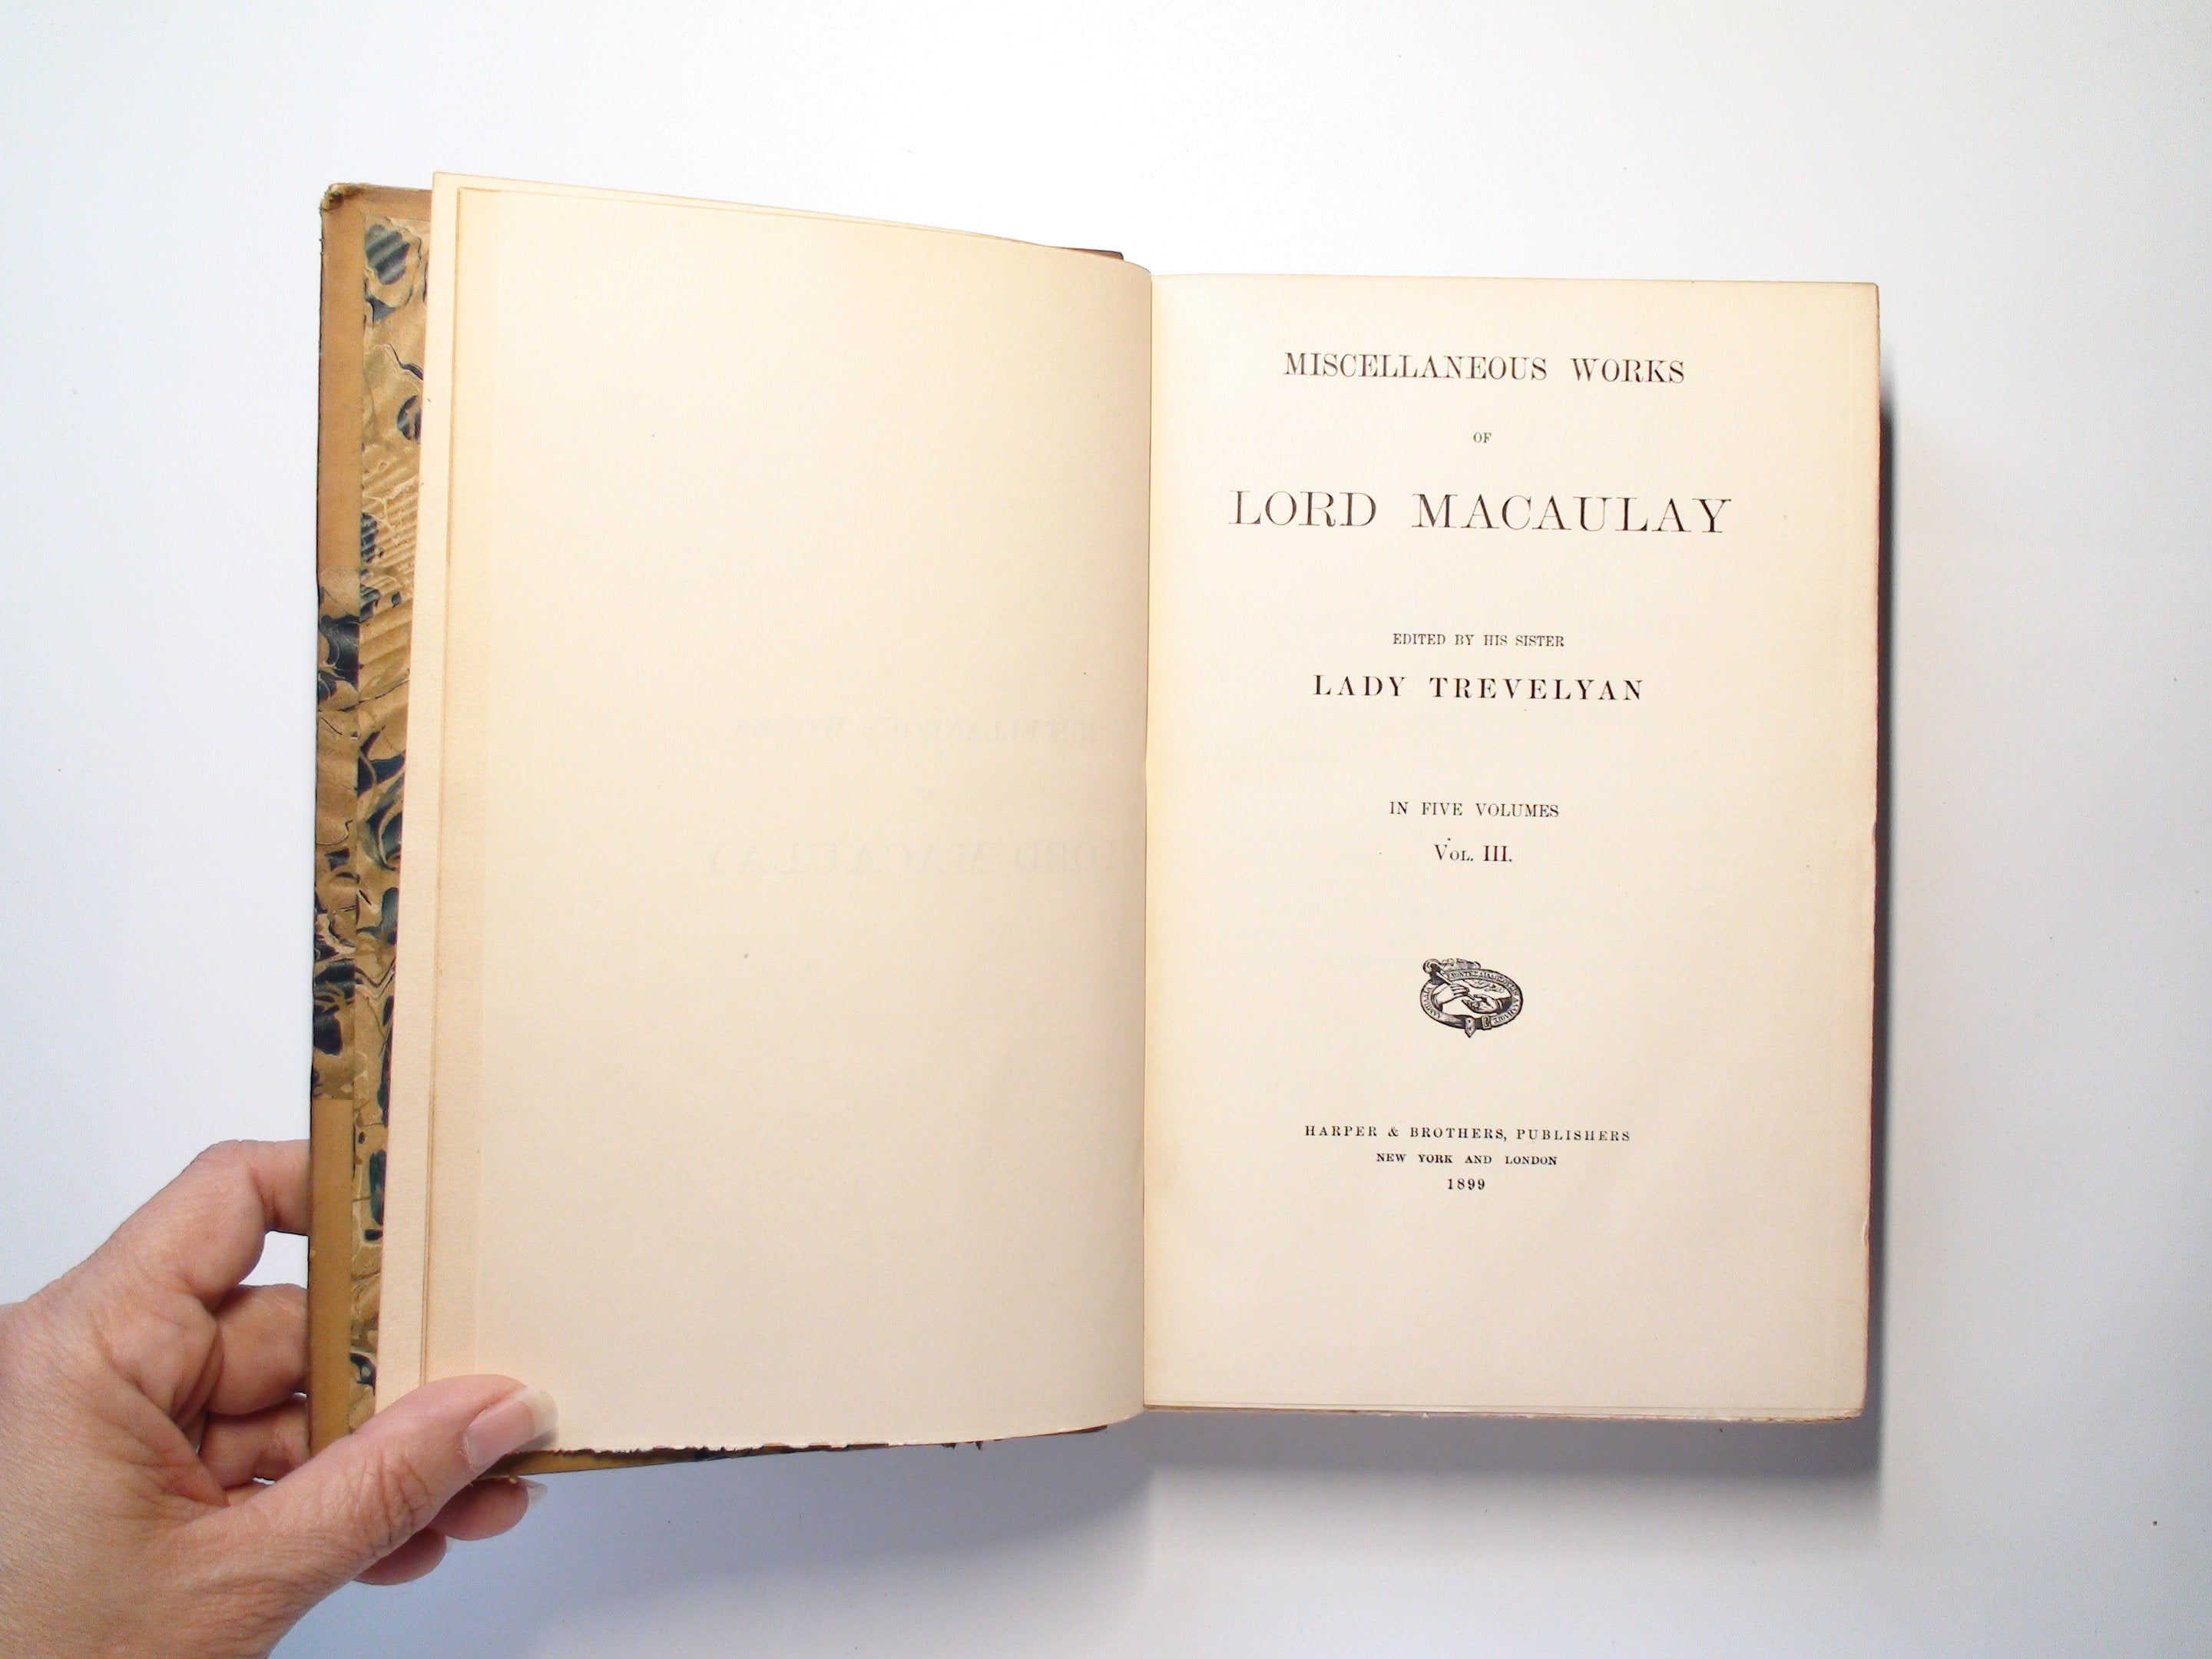 Miscellaneous Works of Lord Macaulay, Ed. by Lady Trevelyan, Vol III, 1899